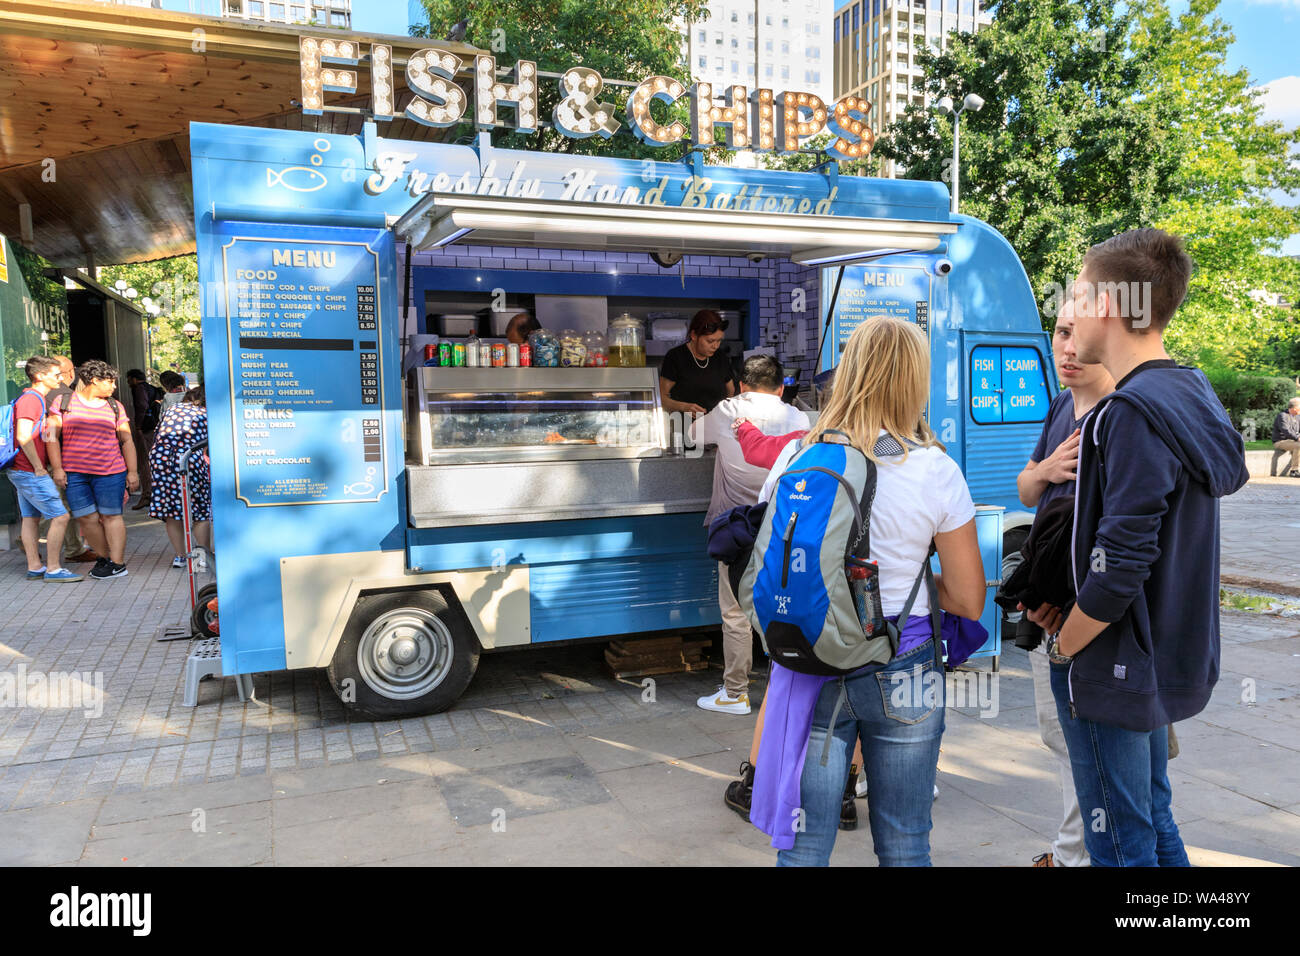 People queue outside a traditional British Fish & Chips takeaway van, fast food stall in London, UK Stock Photo